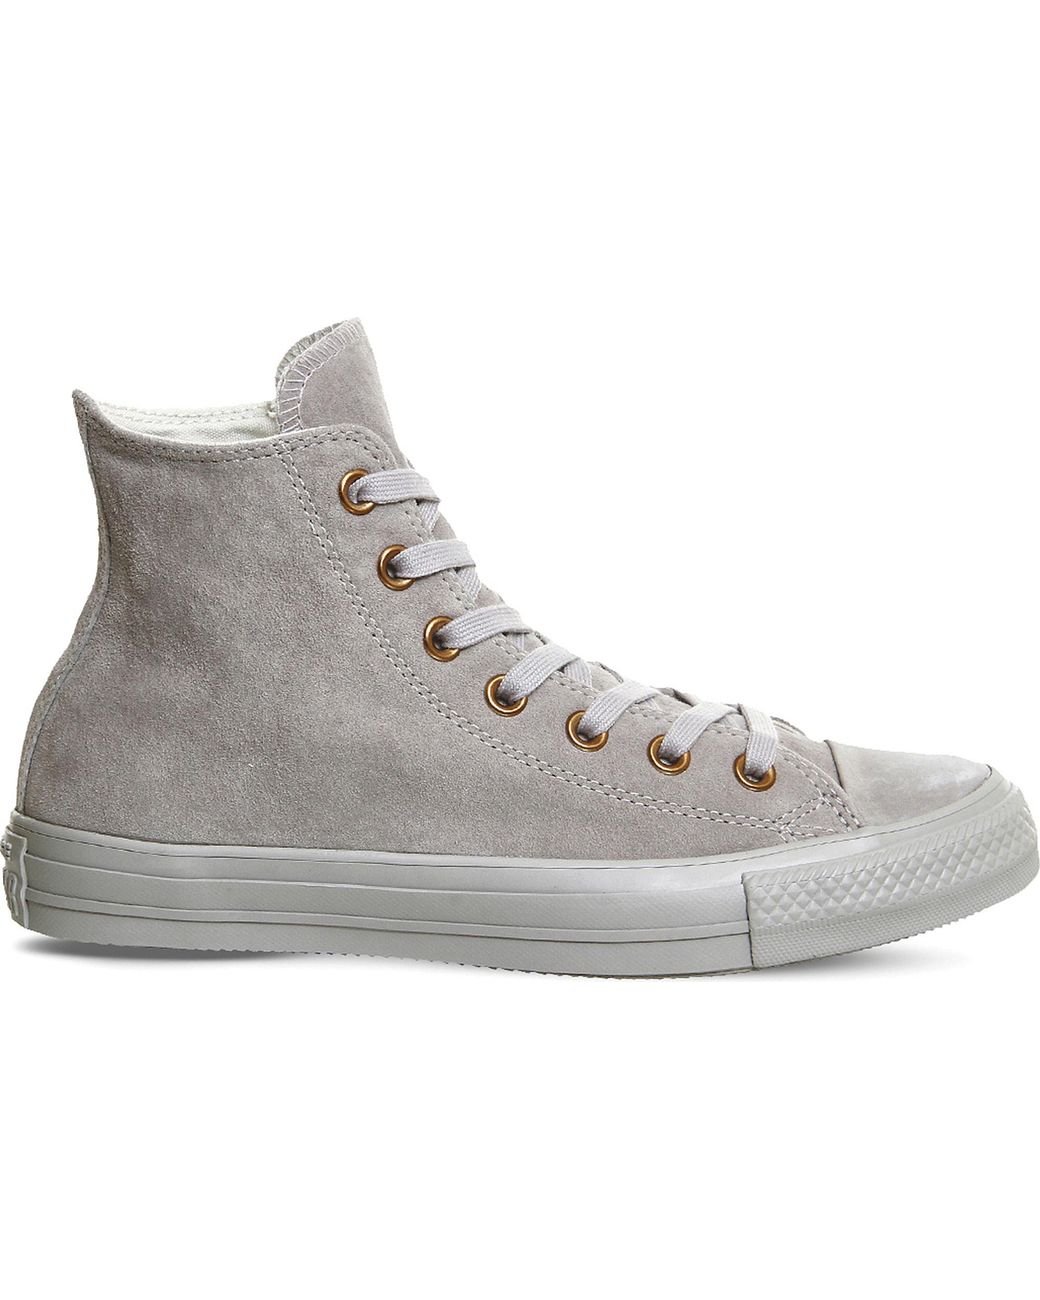 Converse All Star Hi Suede Trainers in Ash Grey Rose Gold (Gray) | Lyst